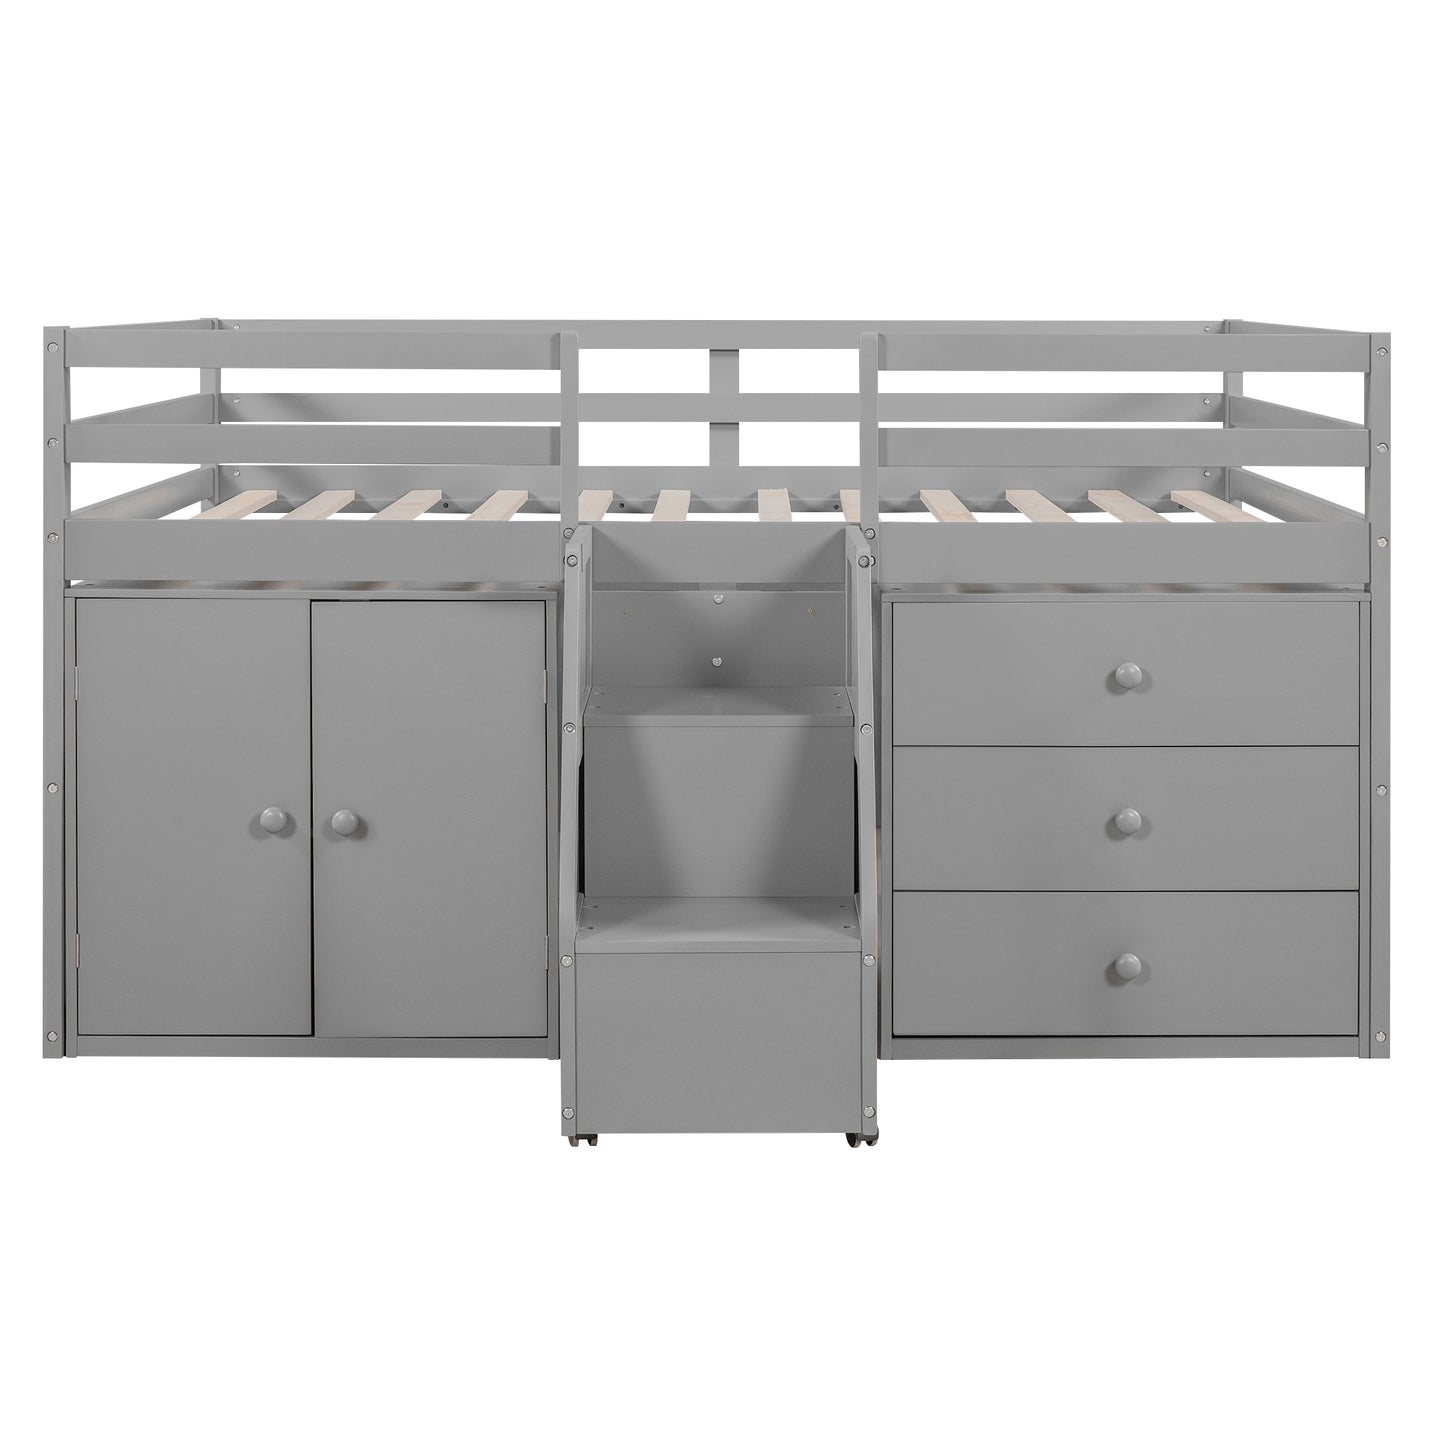 Full Size Functional Loft Bed with Cabinets and Drawers, Hanging Clothes at the back of the Staircase, Gray